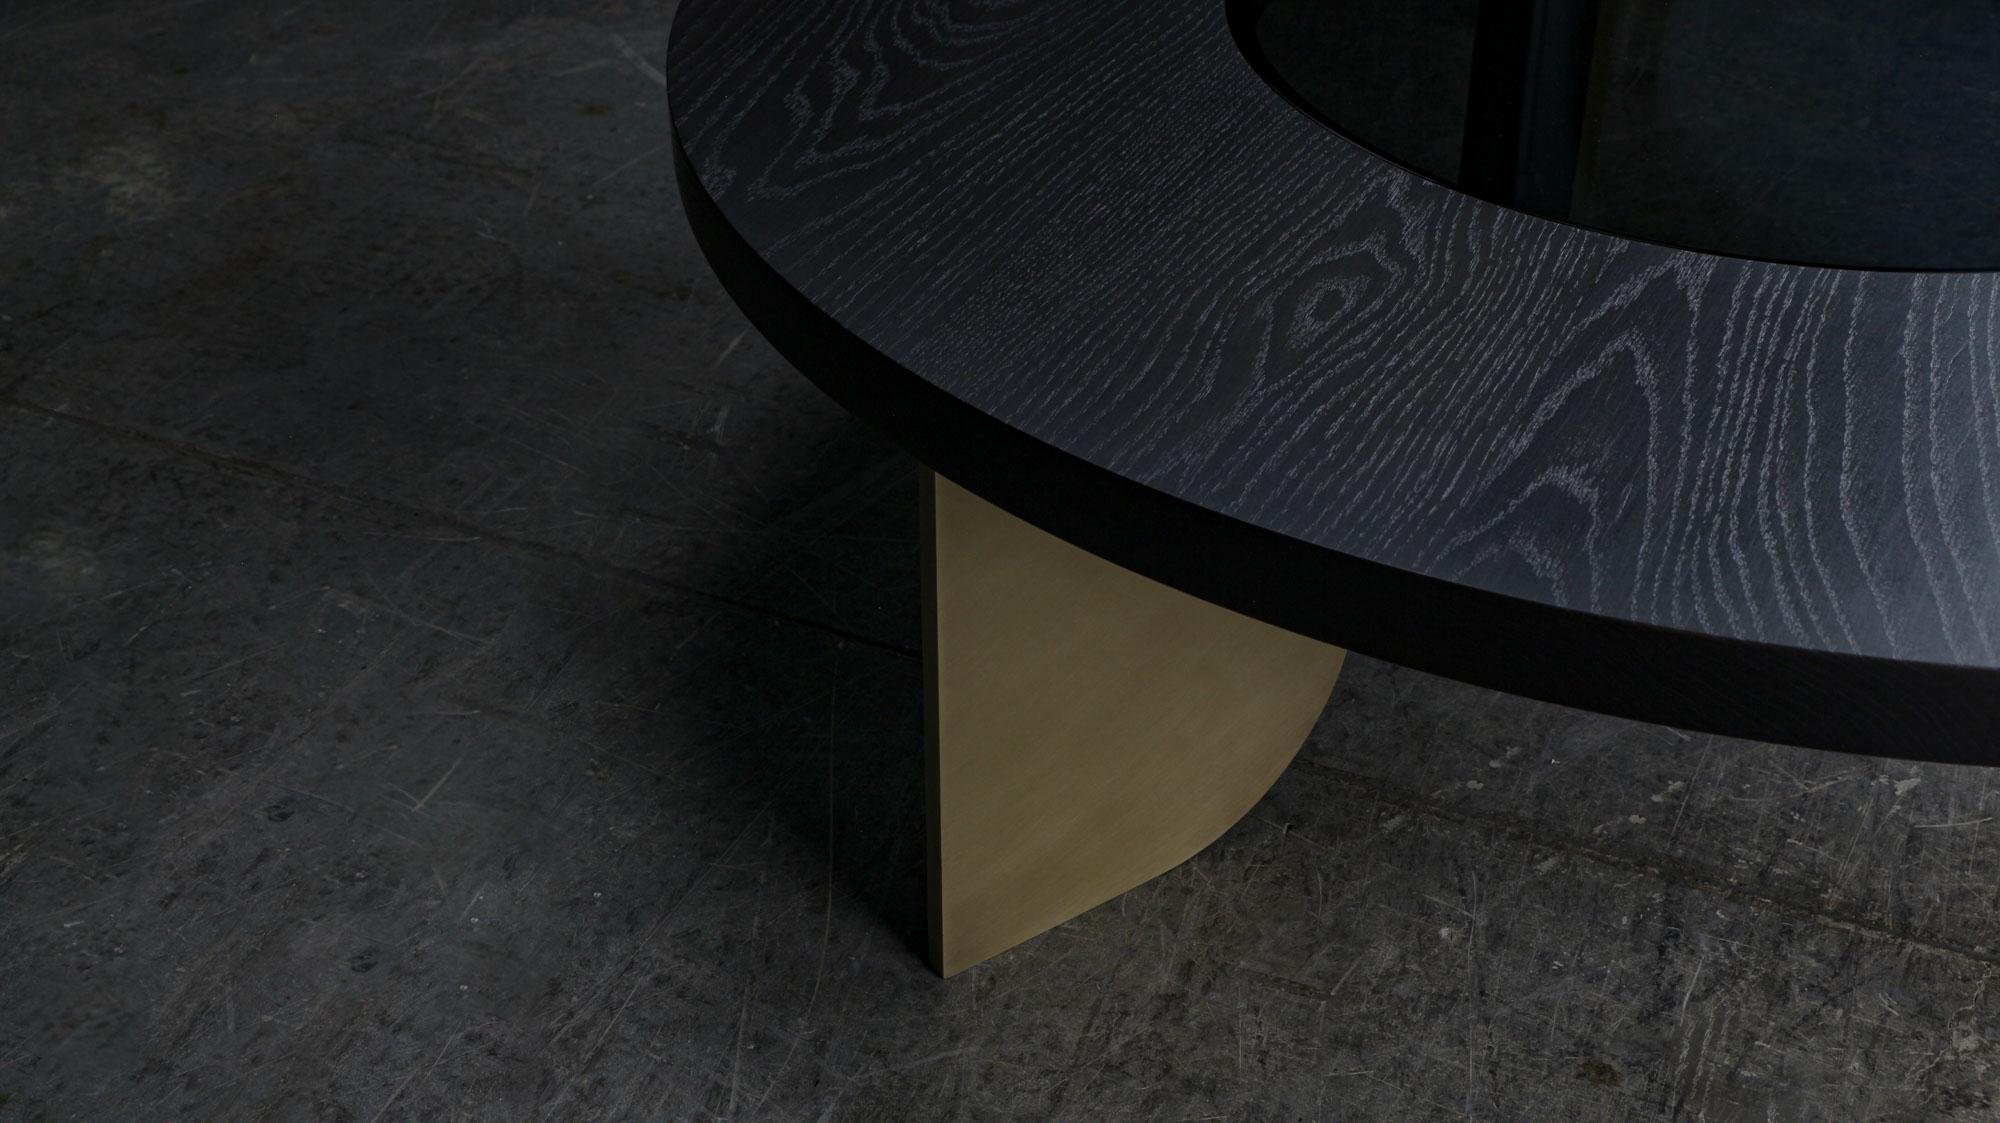 The Jupiter coffee table is handmade from a thick solid wood surface and featured a circular tinted glass surface that lighten the surface an allow some light reflection. The solid wood surface has an hand rubbed hardwax oil finish that enhance the